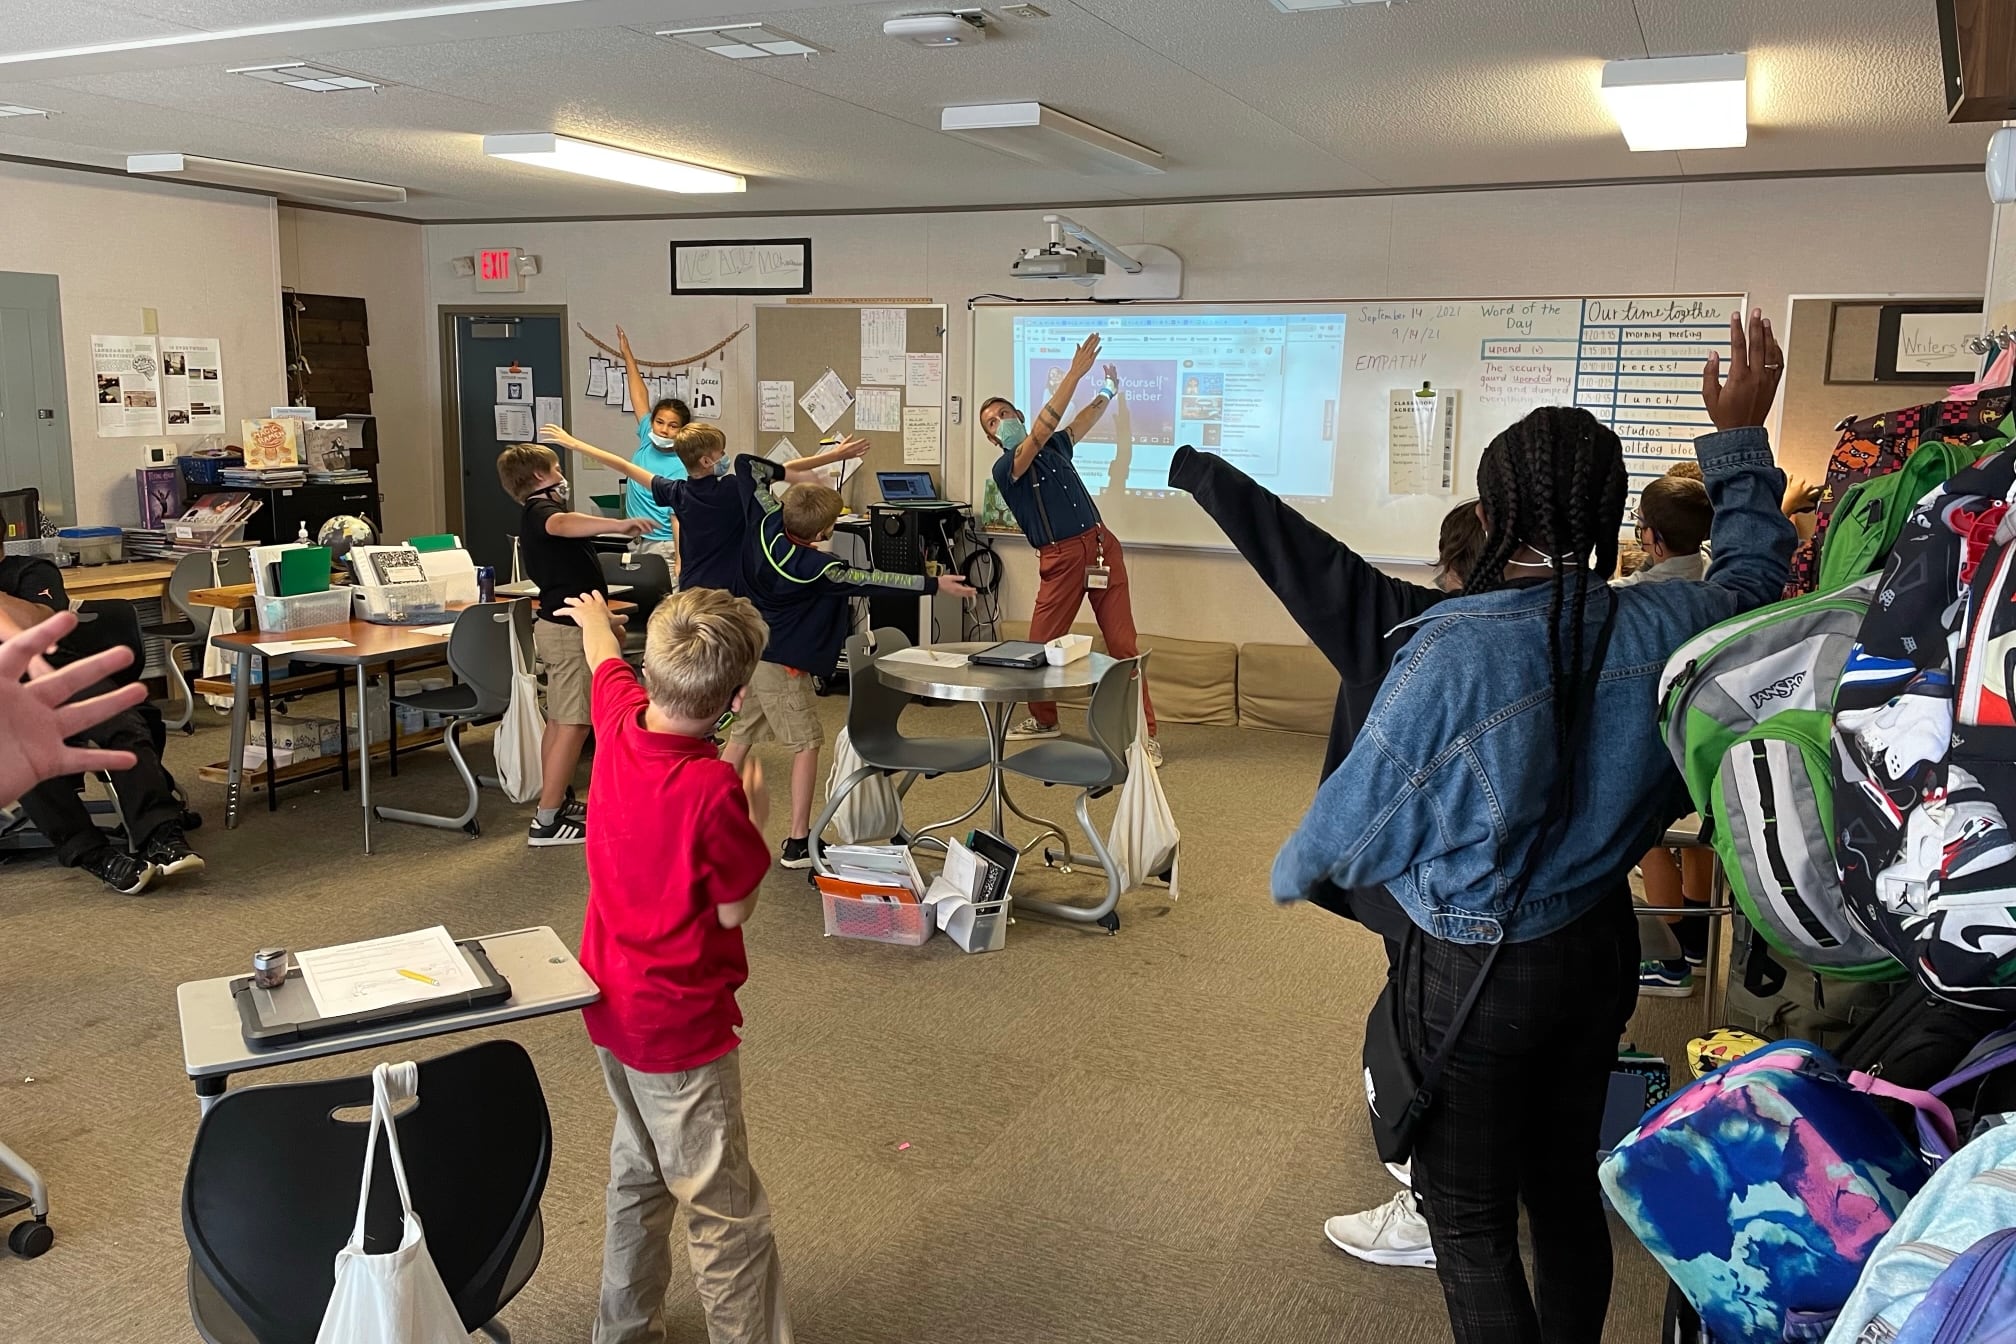 A teacher wearing a mask stands at the front of the classroom, swinging his arms in the air to demonstrate a calming strategy. Students scattered throughout the classroom wave their arms, too.